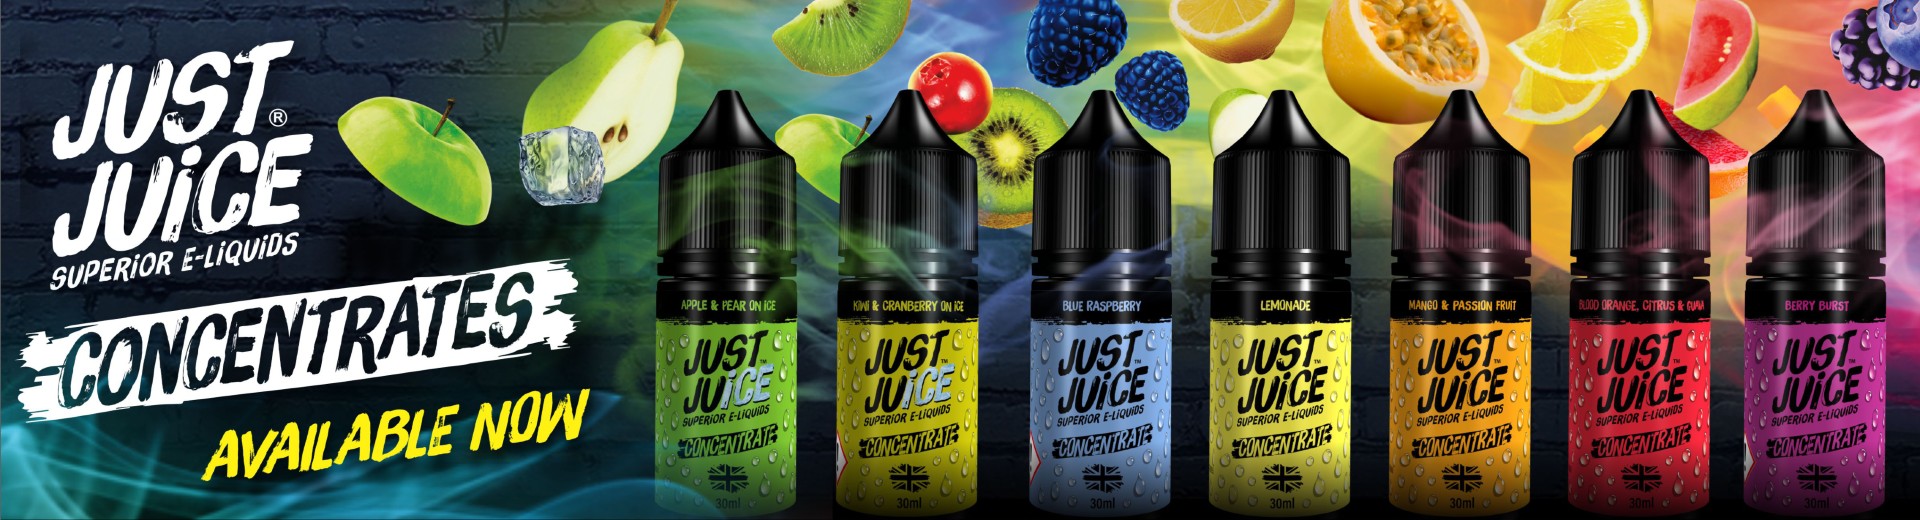 Just Juice Concentrates